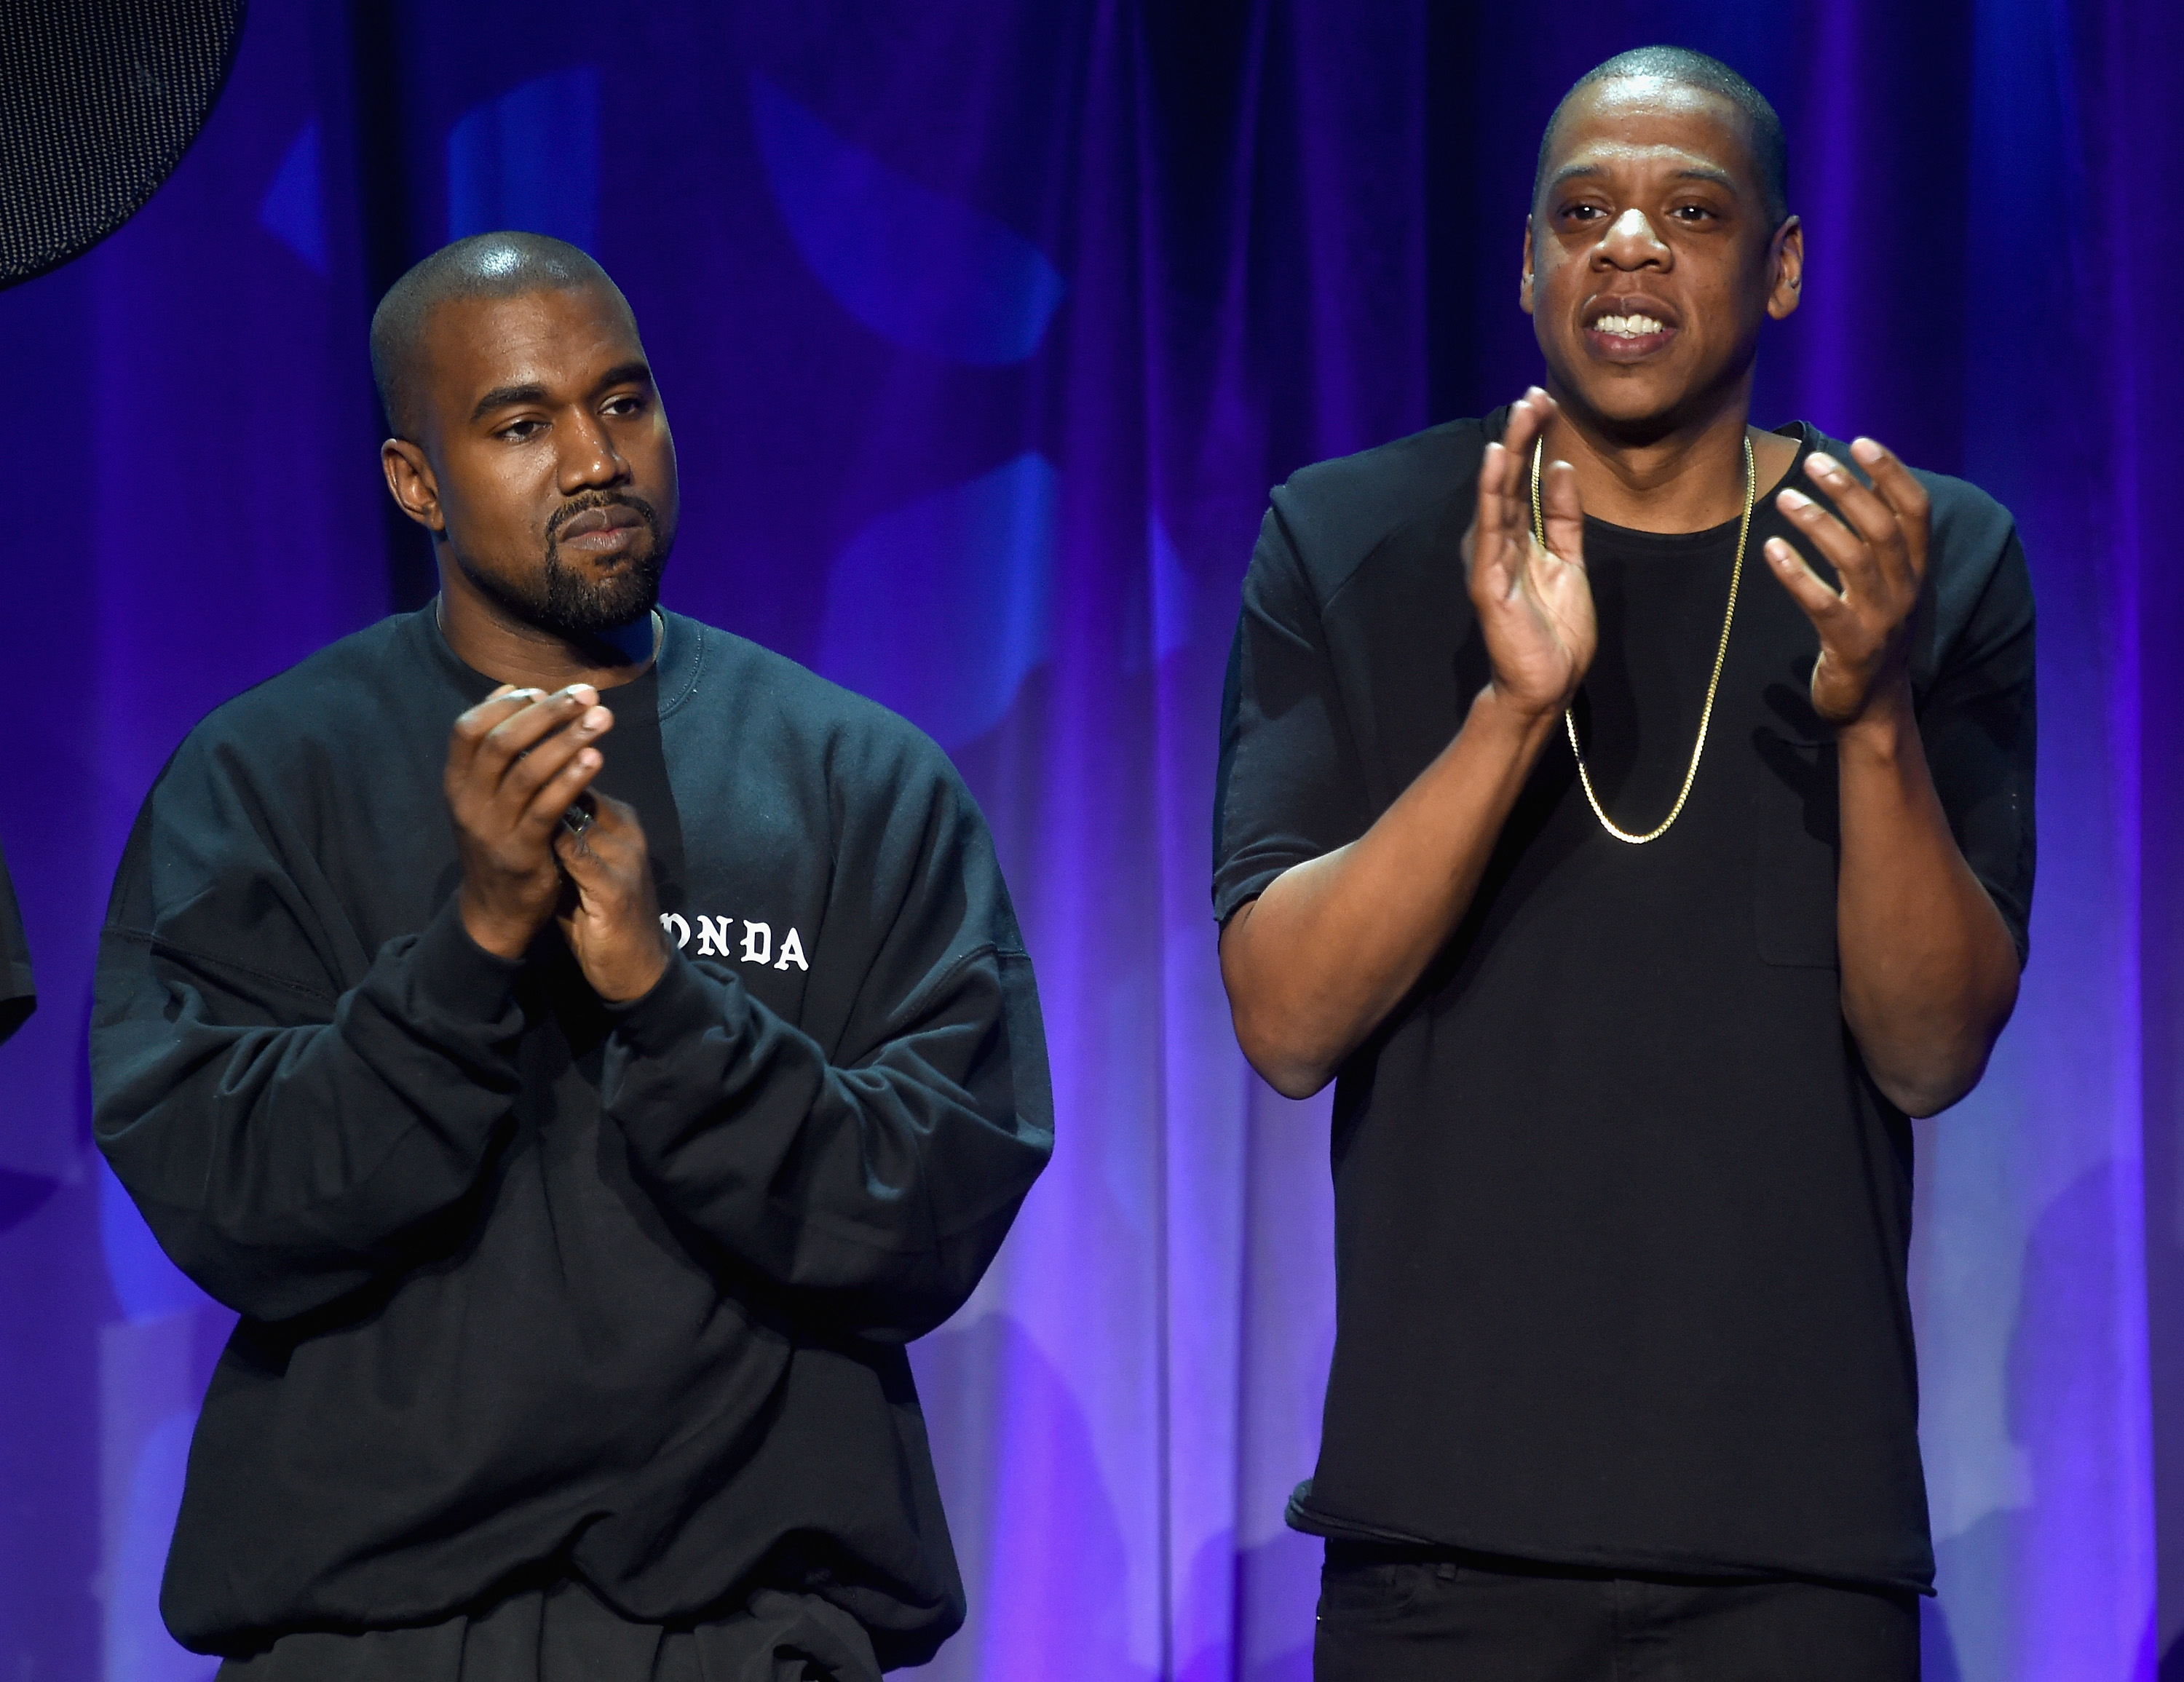 Jay-Z On Kanye West Fallout: “That’s My Brother, We’re Beyond Friends.”